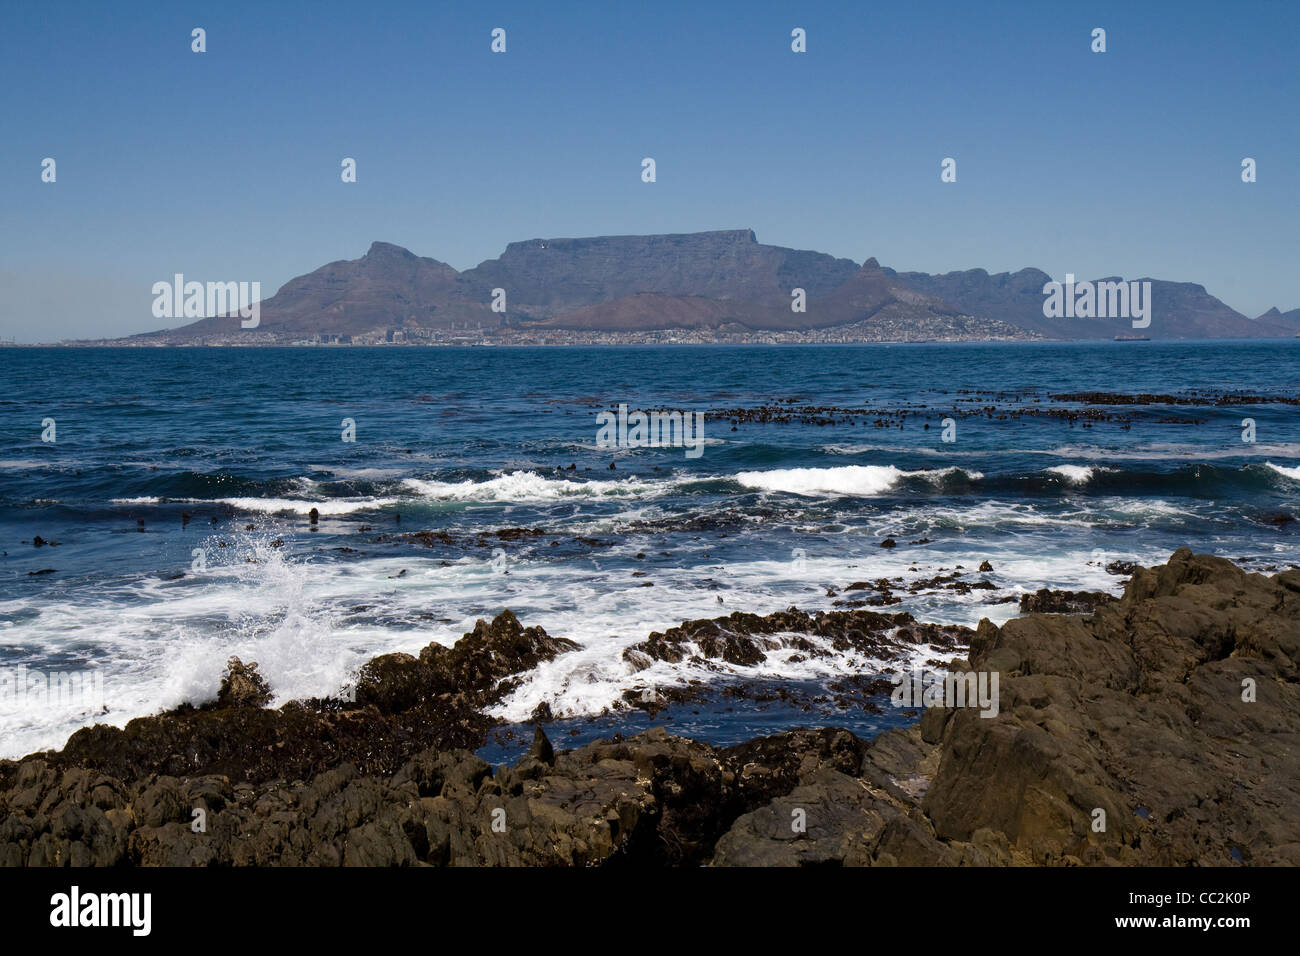 A view of Table Mountain from Robyn Island, Cape Town Stock Photo